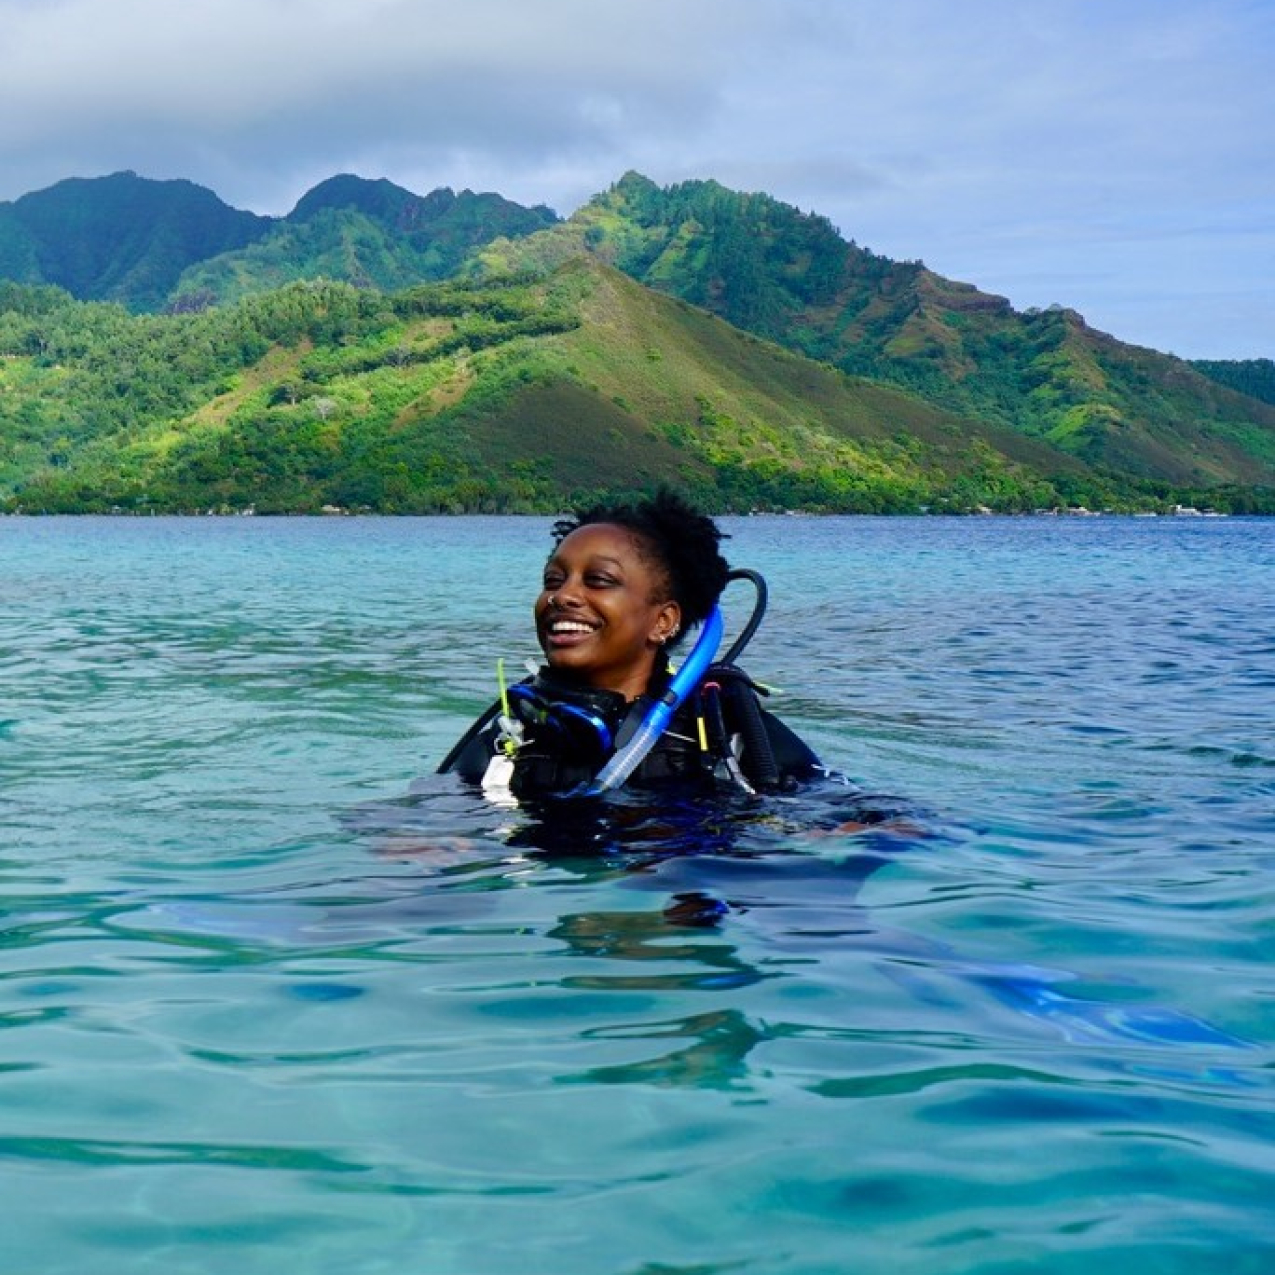 Janelle grins in full SCUBA gear, floating at the surface of crystal clear, blue ocean water. In the background, mountains covered in green vegetation meet the shore.